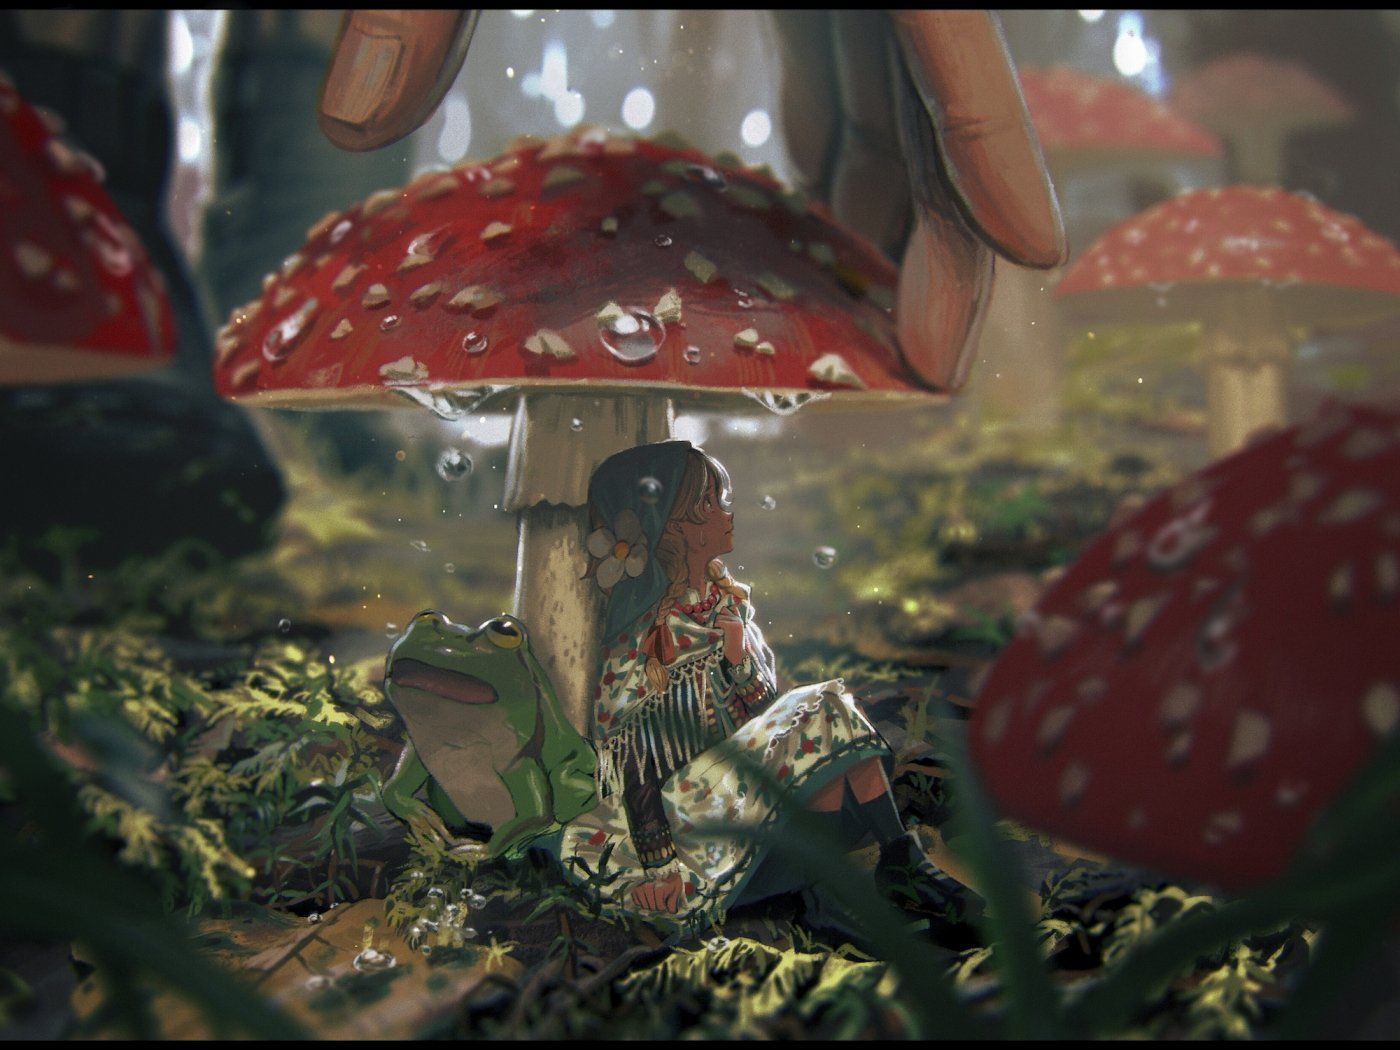 A girl and a toad sit under a mushroom in a forest. - Mushroom